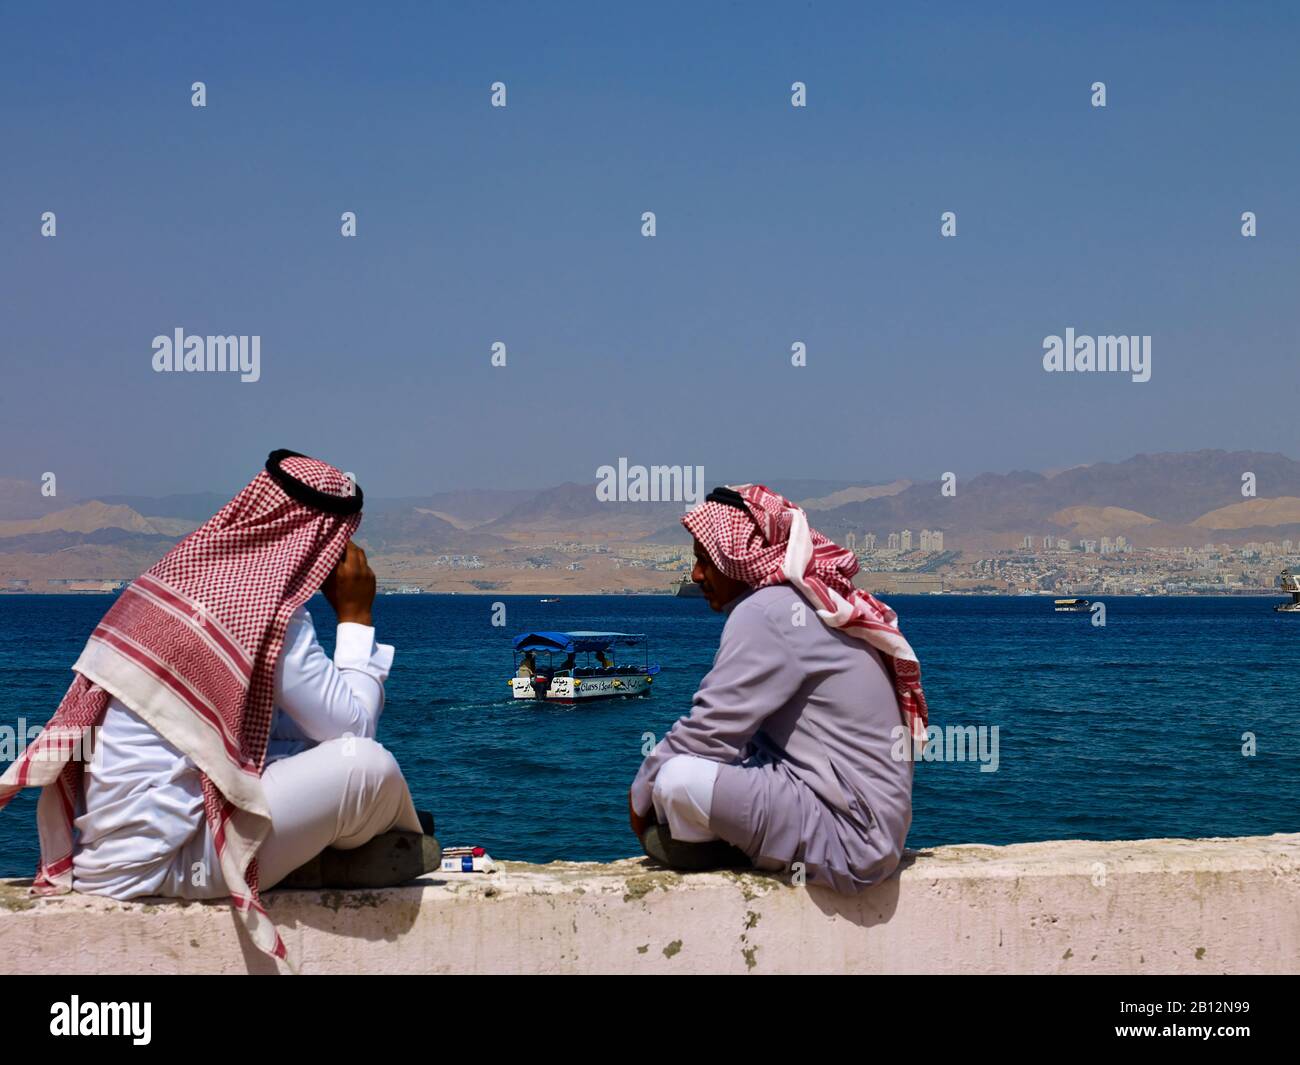 Two Bedouins in the Gulf of Aqaba,Jordan,Middle East Stock Photo